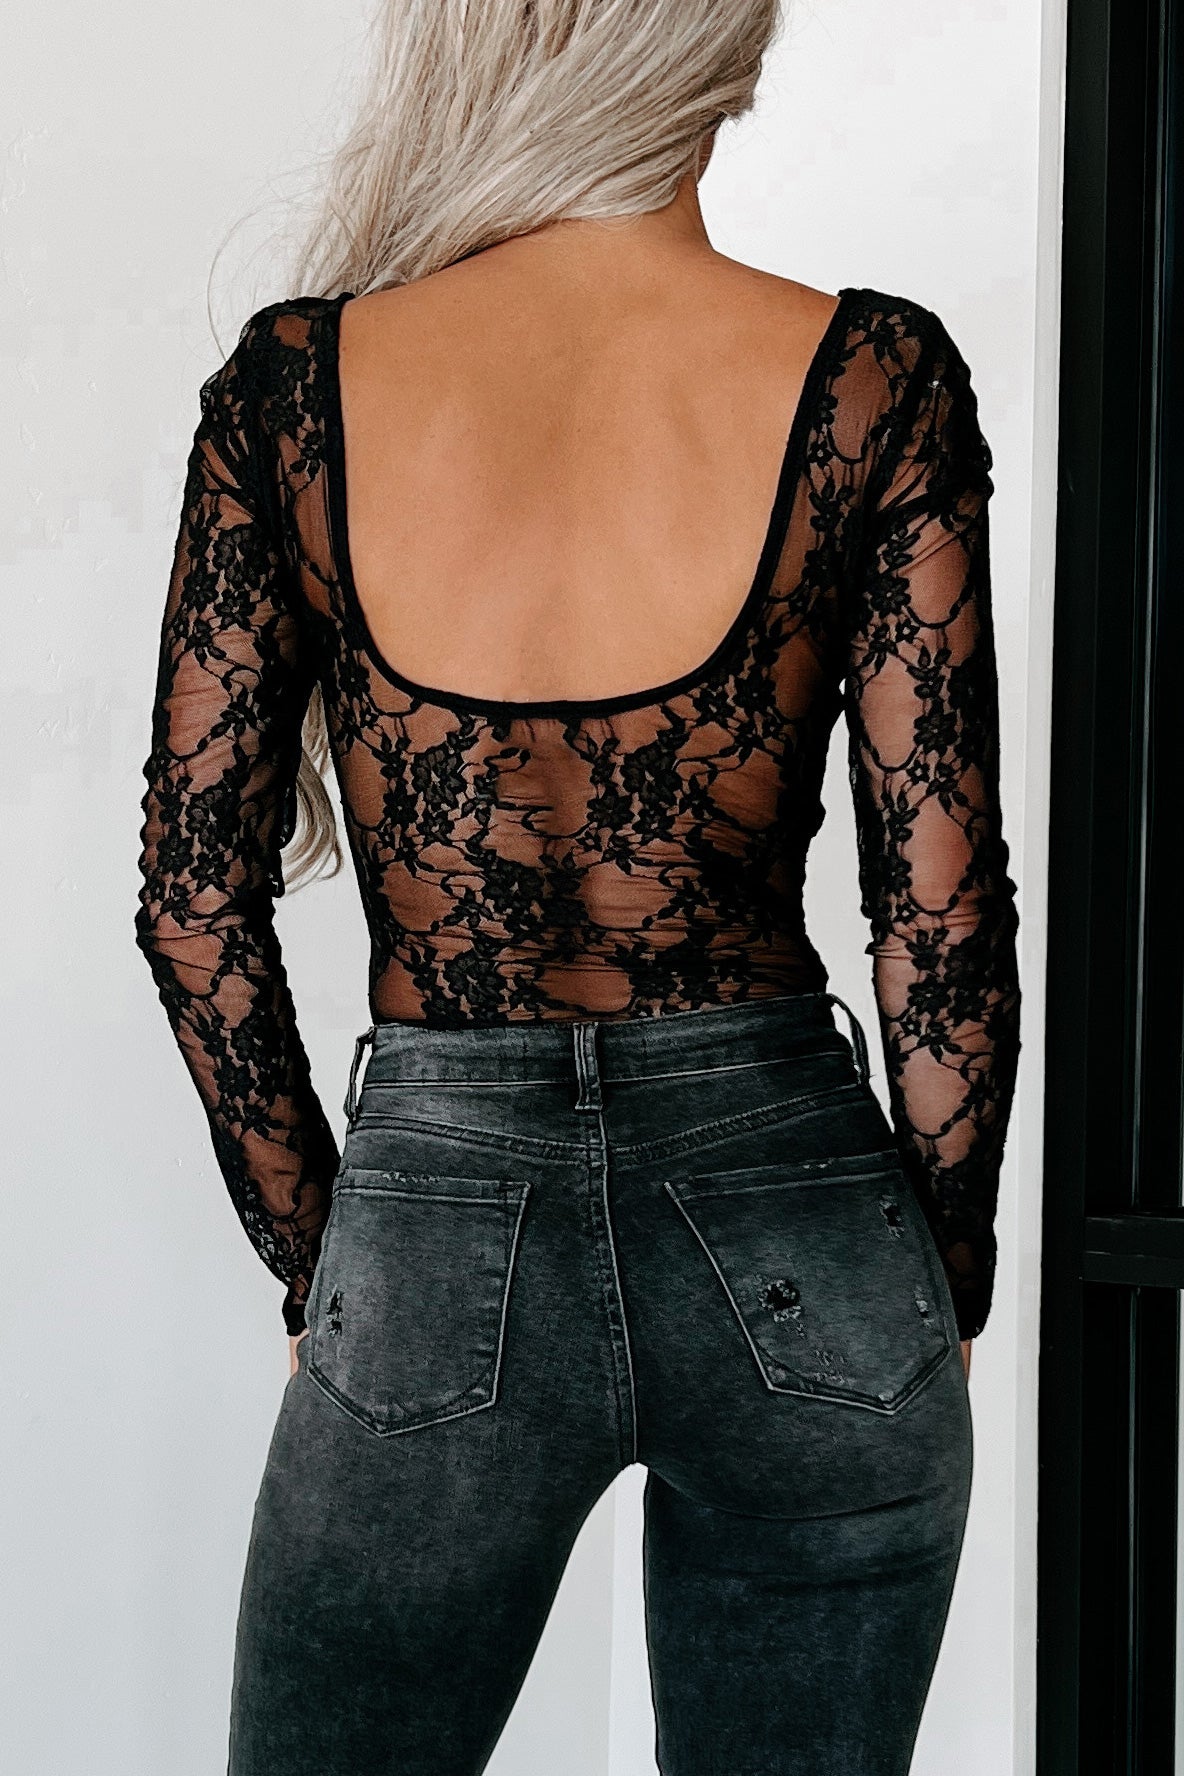 NaaNaa lace long sleeve bodysuit with cut out detail in black